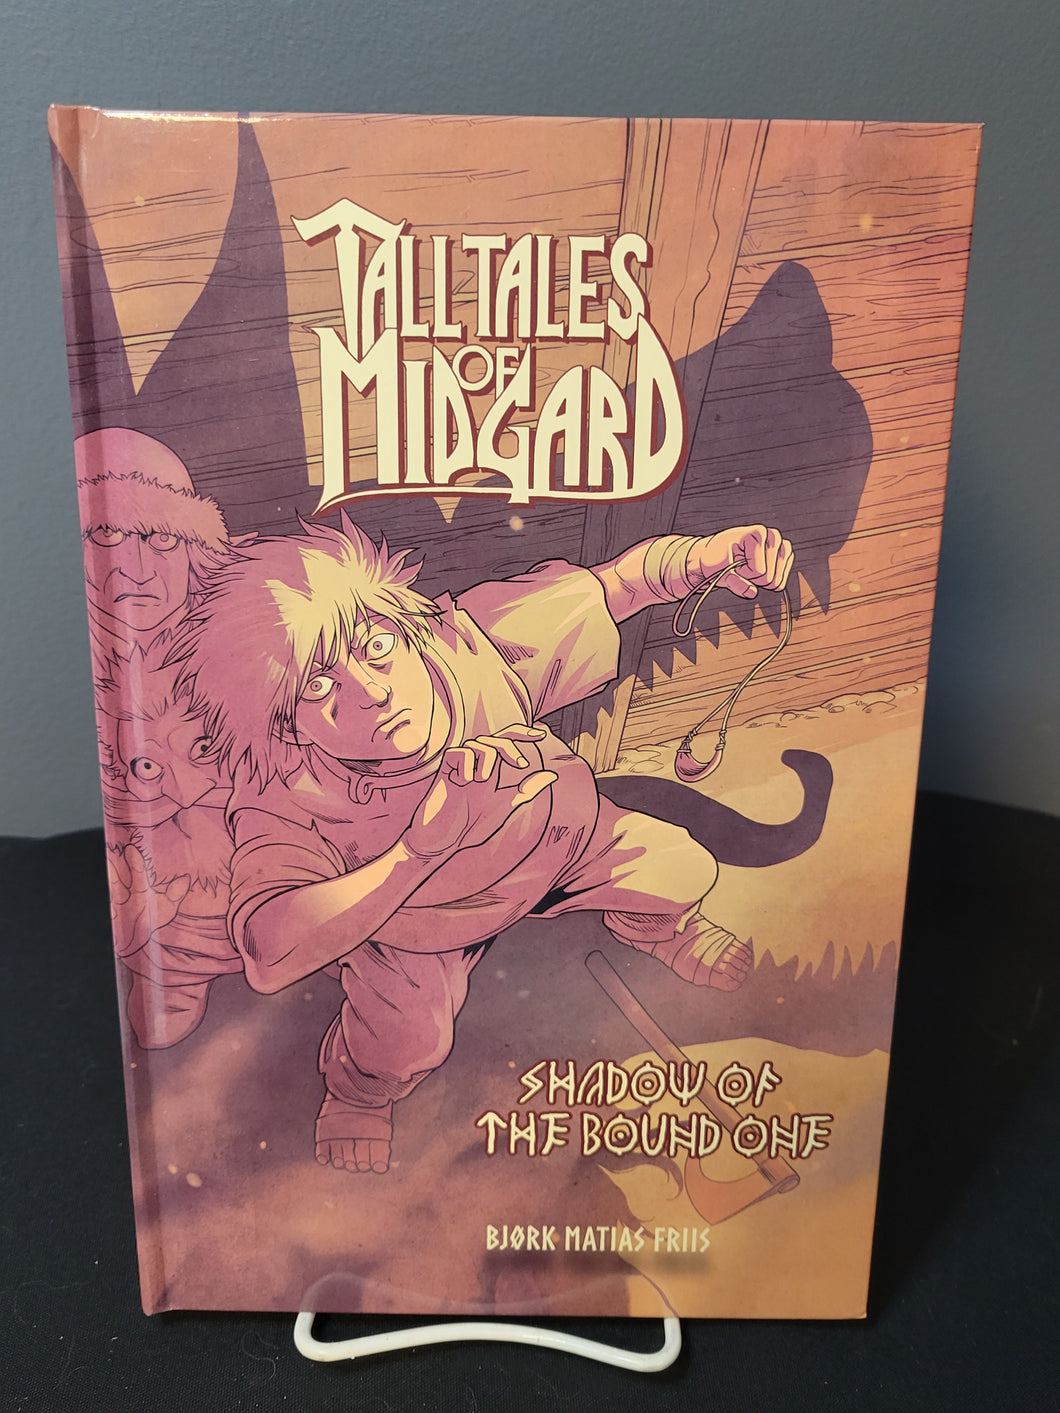 Tall Tales Of Midgard Shadow Of The Bound One Hardcover